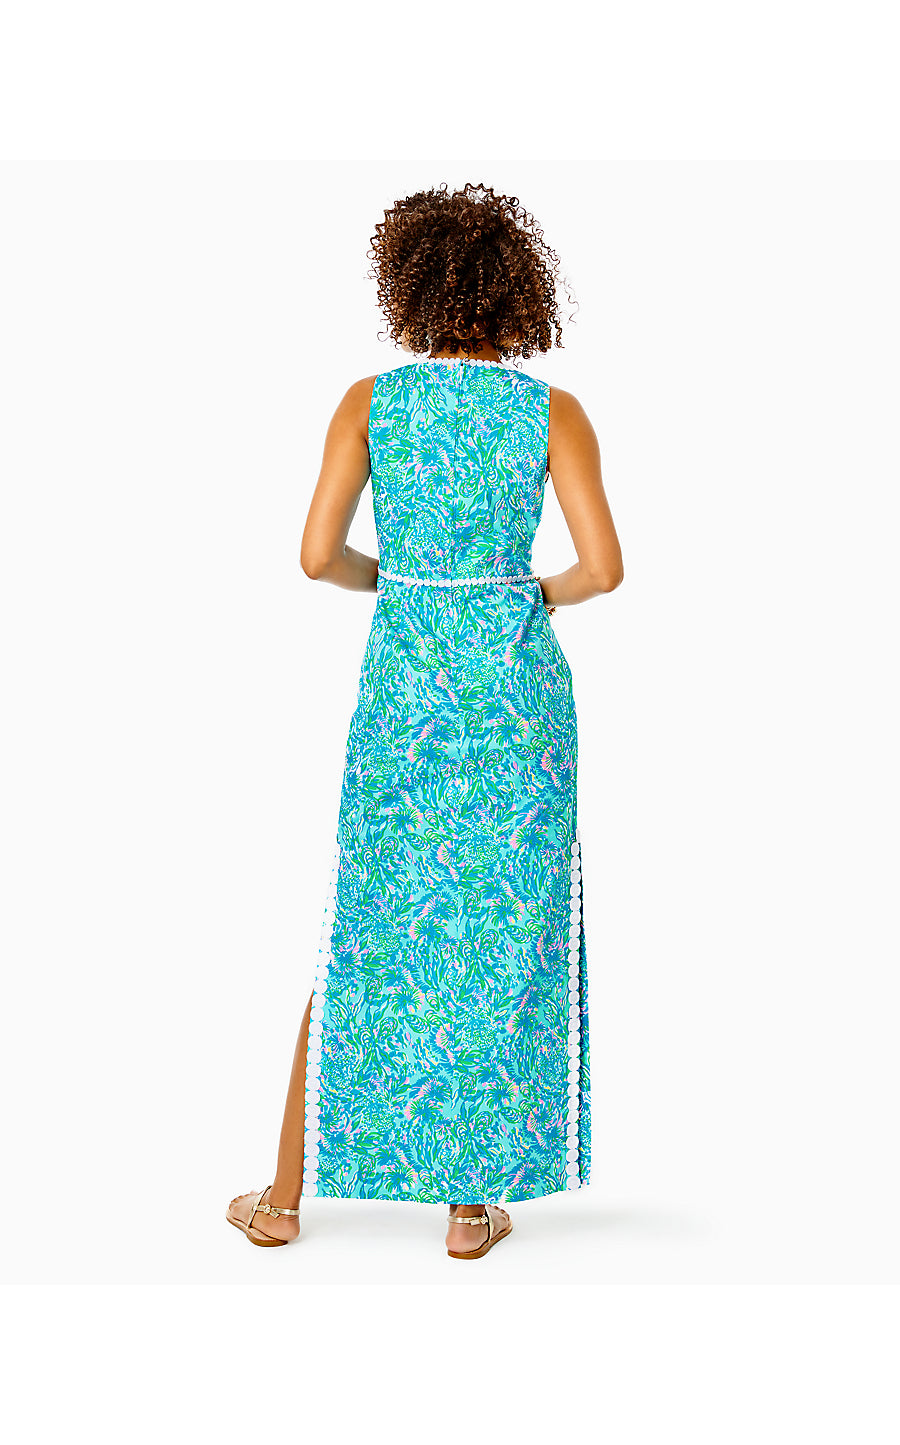 ASHLER STRETCH MAXI SHIFT - SURF BLUE - CORAL OF THE STORY